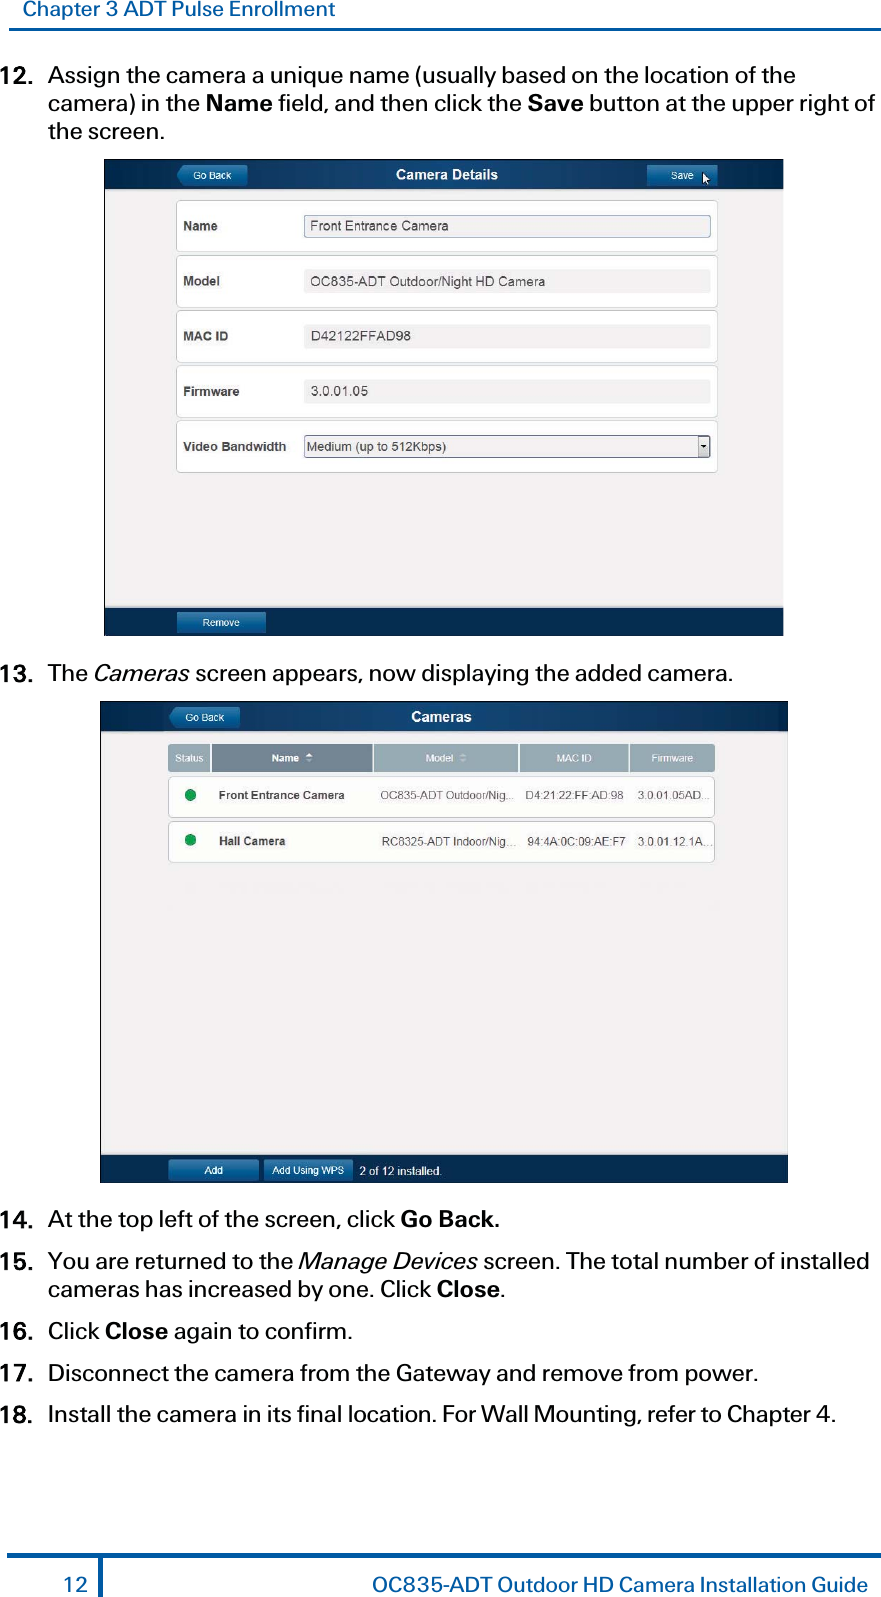 Chapter 3 ADT Pulse Enrollment 12. Assign the camera a unique name (usually based on the location of the camera) in the Name field, and then click the Save button at the upper right of the screen.  13. The Cameras screen appears, now displaying the added camera.  14. At the top left of the screen, click Go Back. 15. You are returned to the Manage Devices screen. The total number of installed cameras has increased by one. Click Close. 16. Click Close again to confirm.  17. Disconnect the camera from the Gateway and remove from power.  18. Install the camera in its final location. For Wall Mounting, refer to Chapter 4. 12  OC835-ADT Outdoor HD Camera Installation Guide 